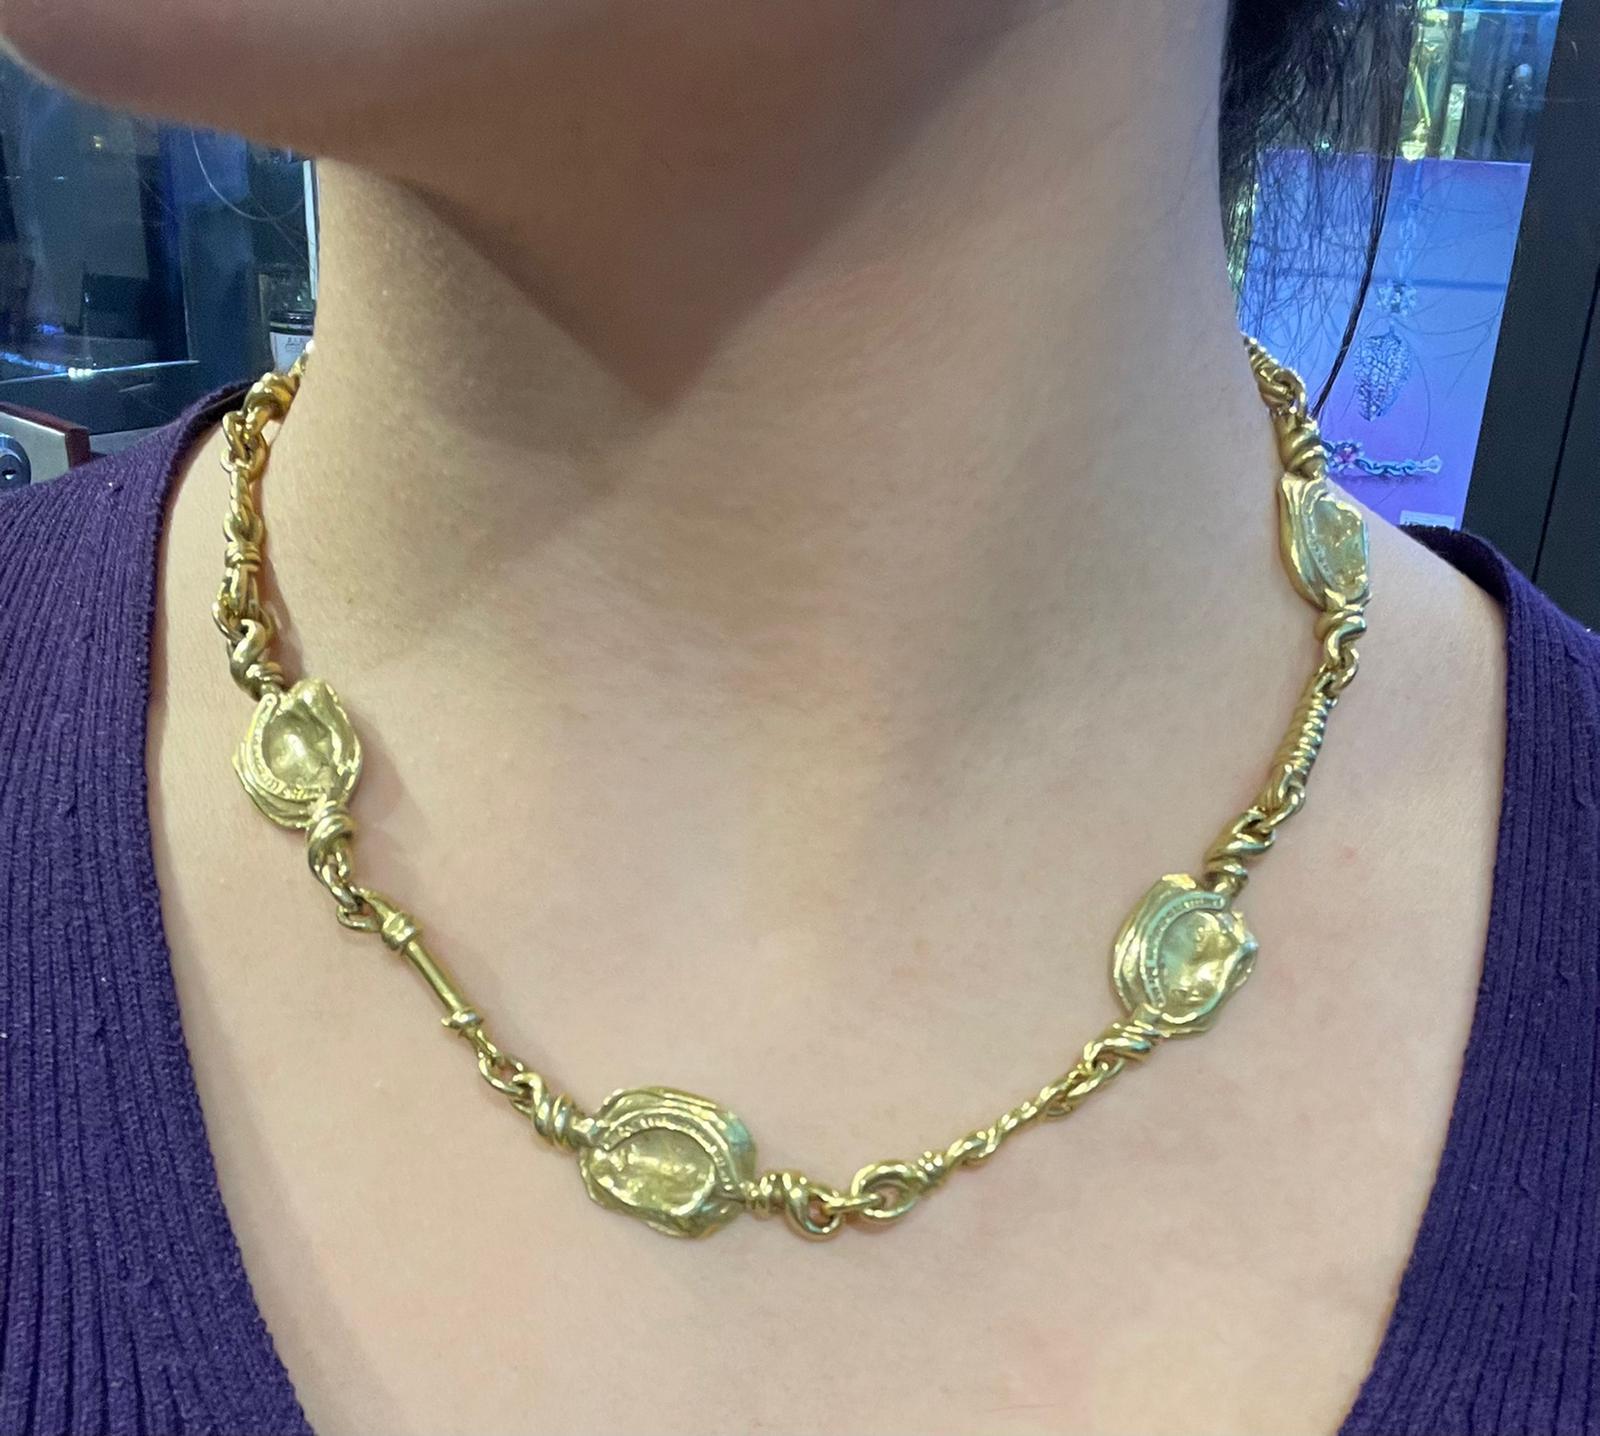 Barry Kieselstein Cord Gold Disc Necklace

A beautiful gold link necklace by Barry Kieselstein-Cord featuring 6 gold discs embossed with face motifs of a man. 

Metal Type: 18 Karat Yellow Gold 

Stamped: B. Kieselstein-cord 1993 

Measures